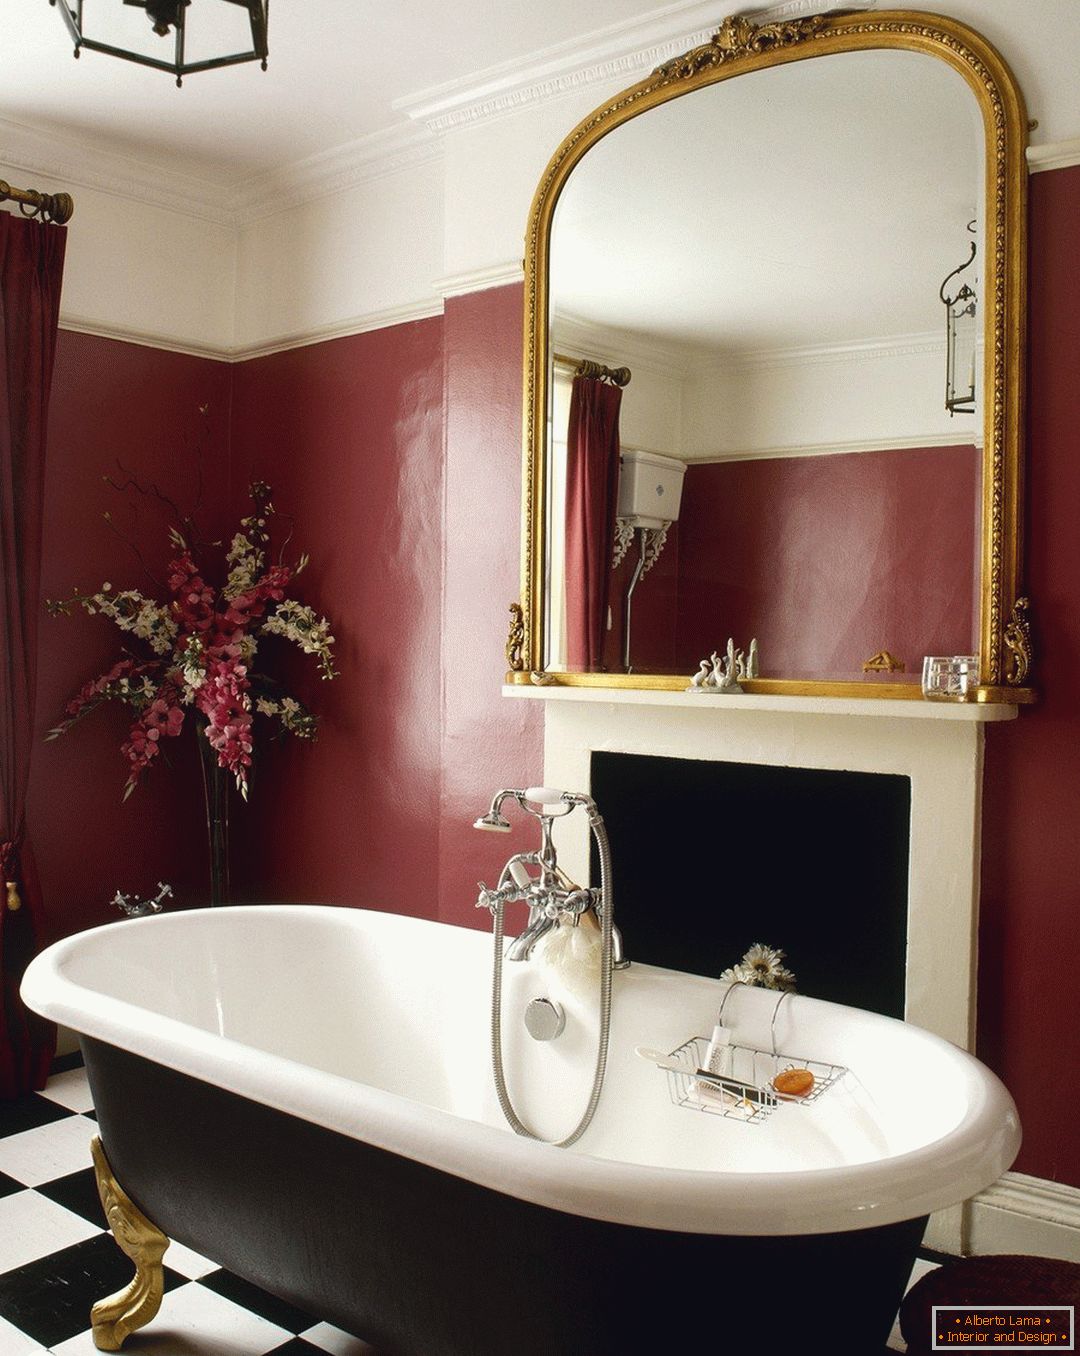 Wall claret color in the bathroom